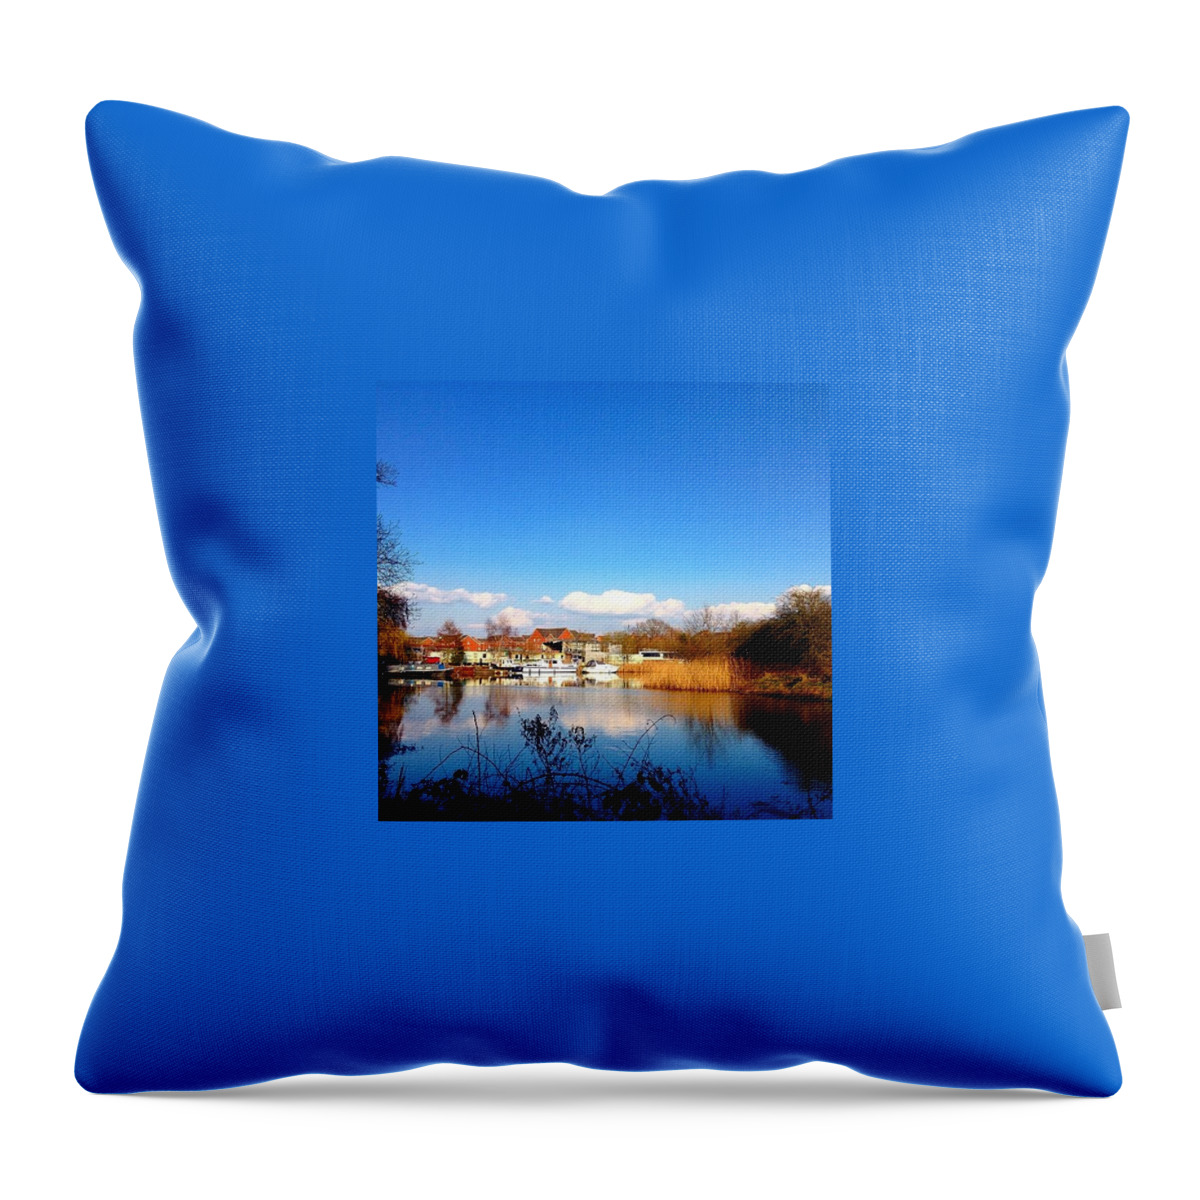 Harbour Throw Pillow featuring the photograph Riverside Harbour by Grace Smith